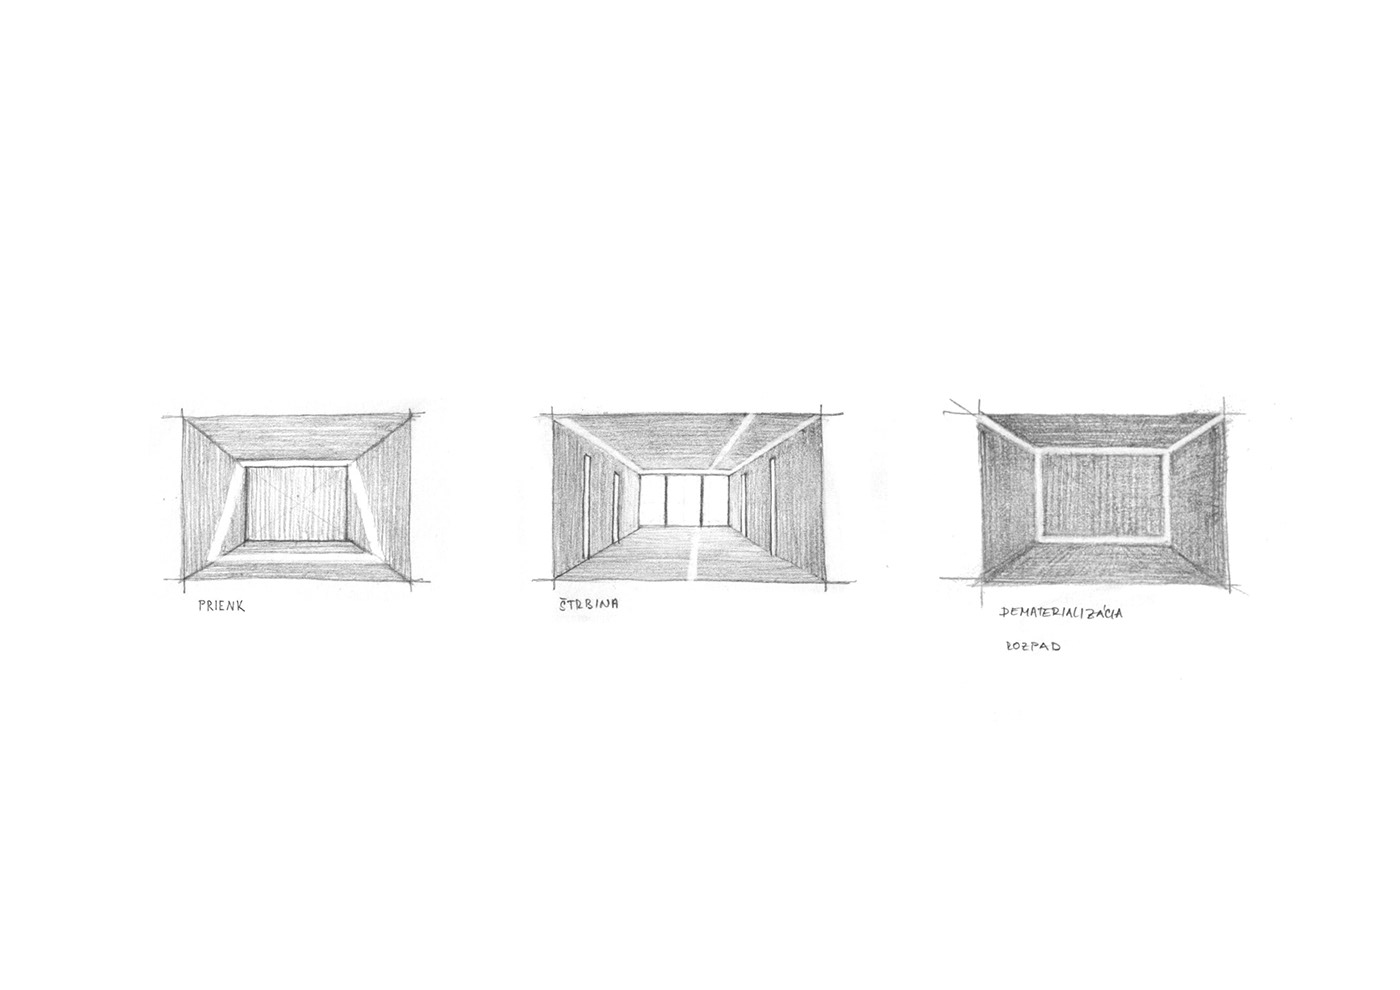 cemetery bachelor thesis Architecture Student light crematorium funeral Funeral hall Light and Architecture slit